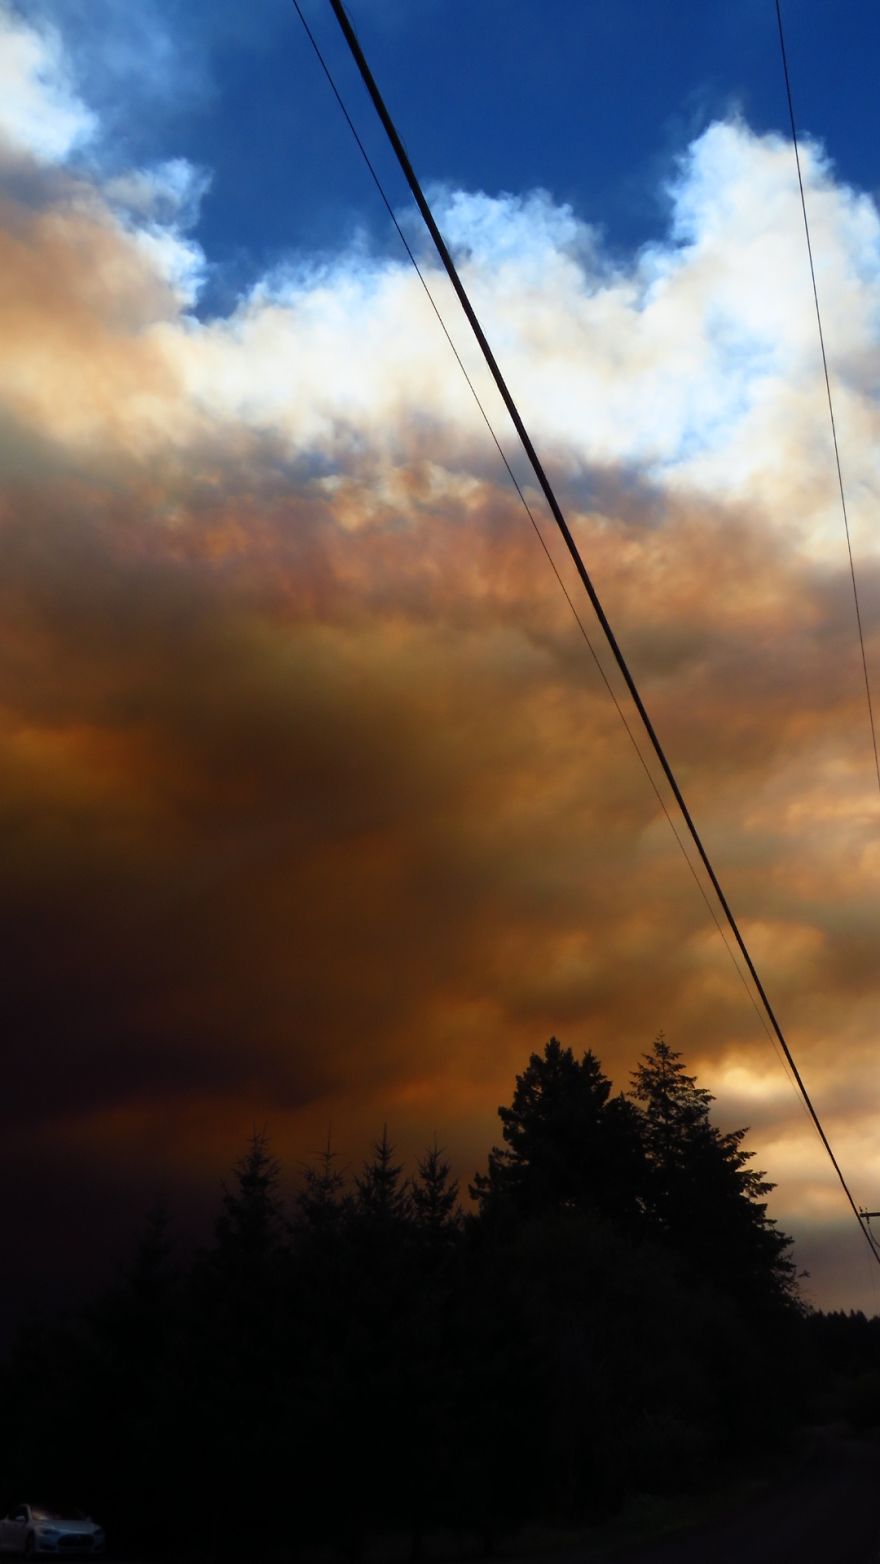 I Took These 14 Photos Of Massive Wildfires A Day Before Evacuation From My House In Oregon